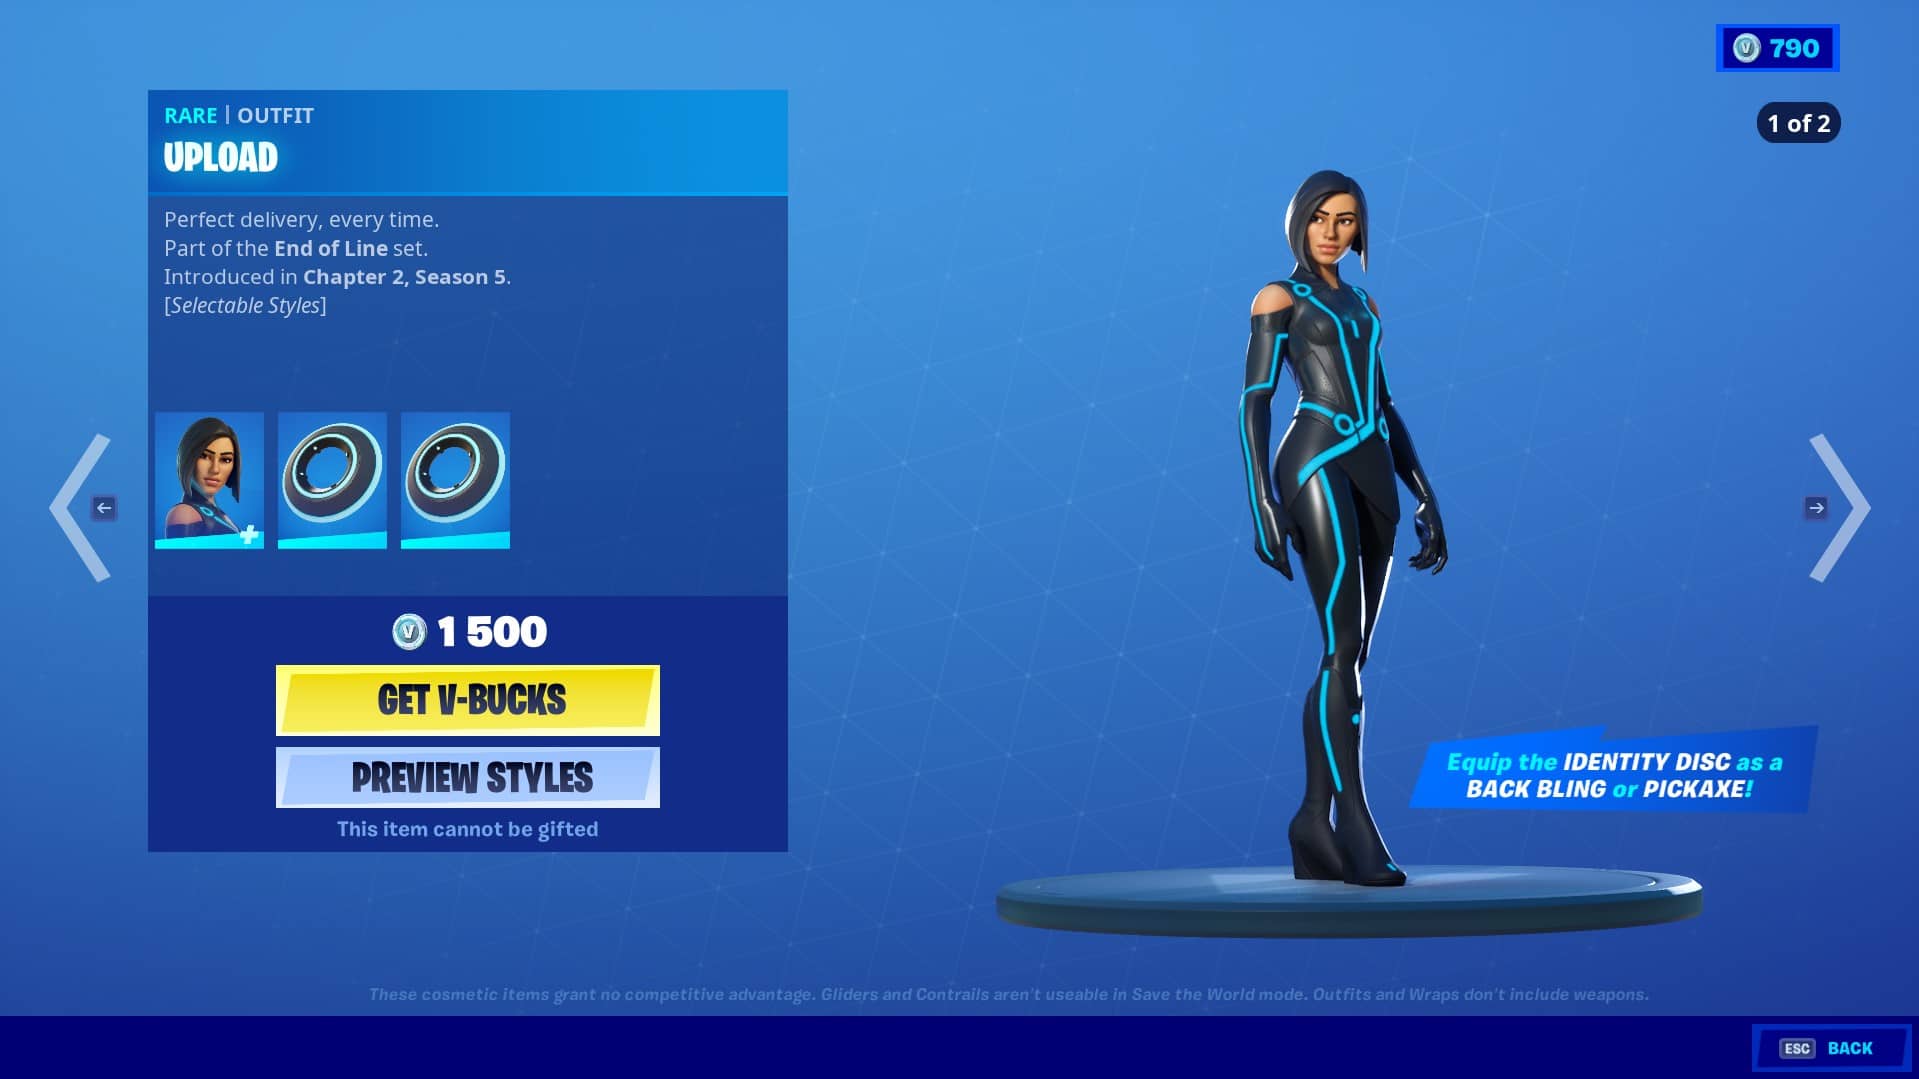 Tron skins are available in Fortnite